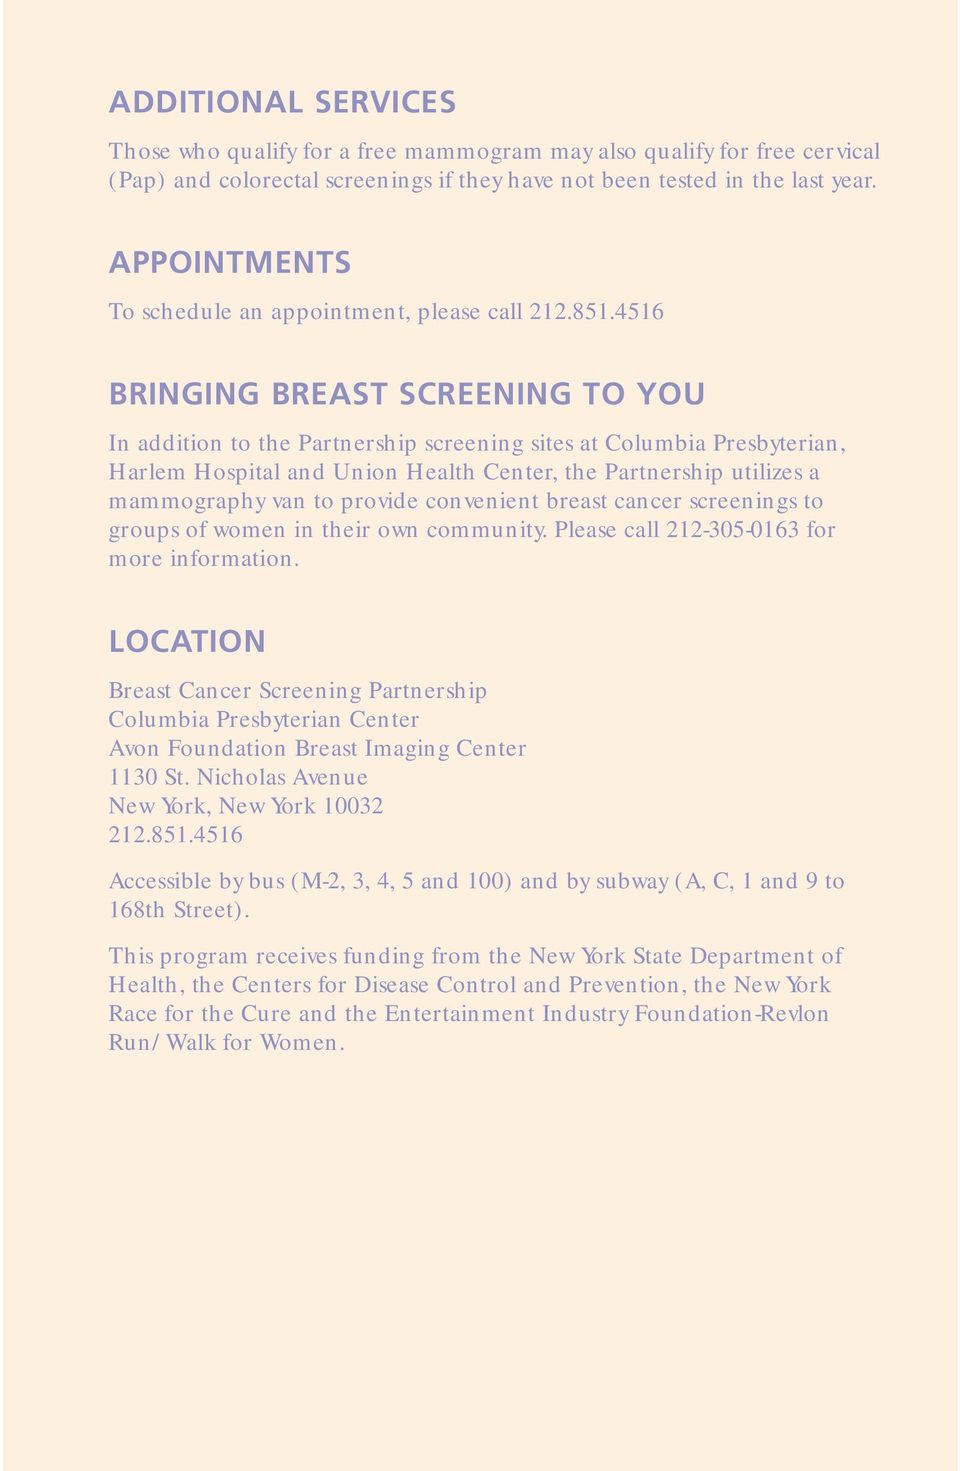 4516 BRINGING BREAST SCREENING TO YOU In addition to the Partnership screening sites at Columbia Presbyterian, Harlem Hospital and Union Health Center, the Partnership utilizes a mammography van to